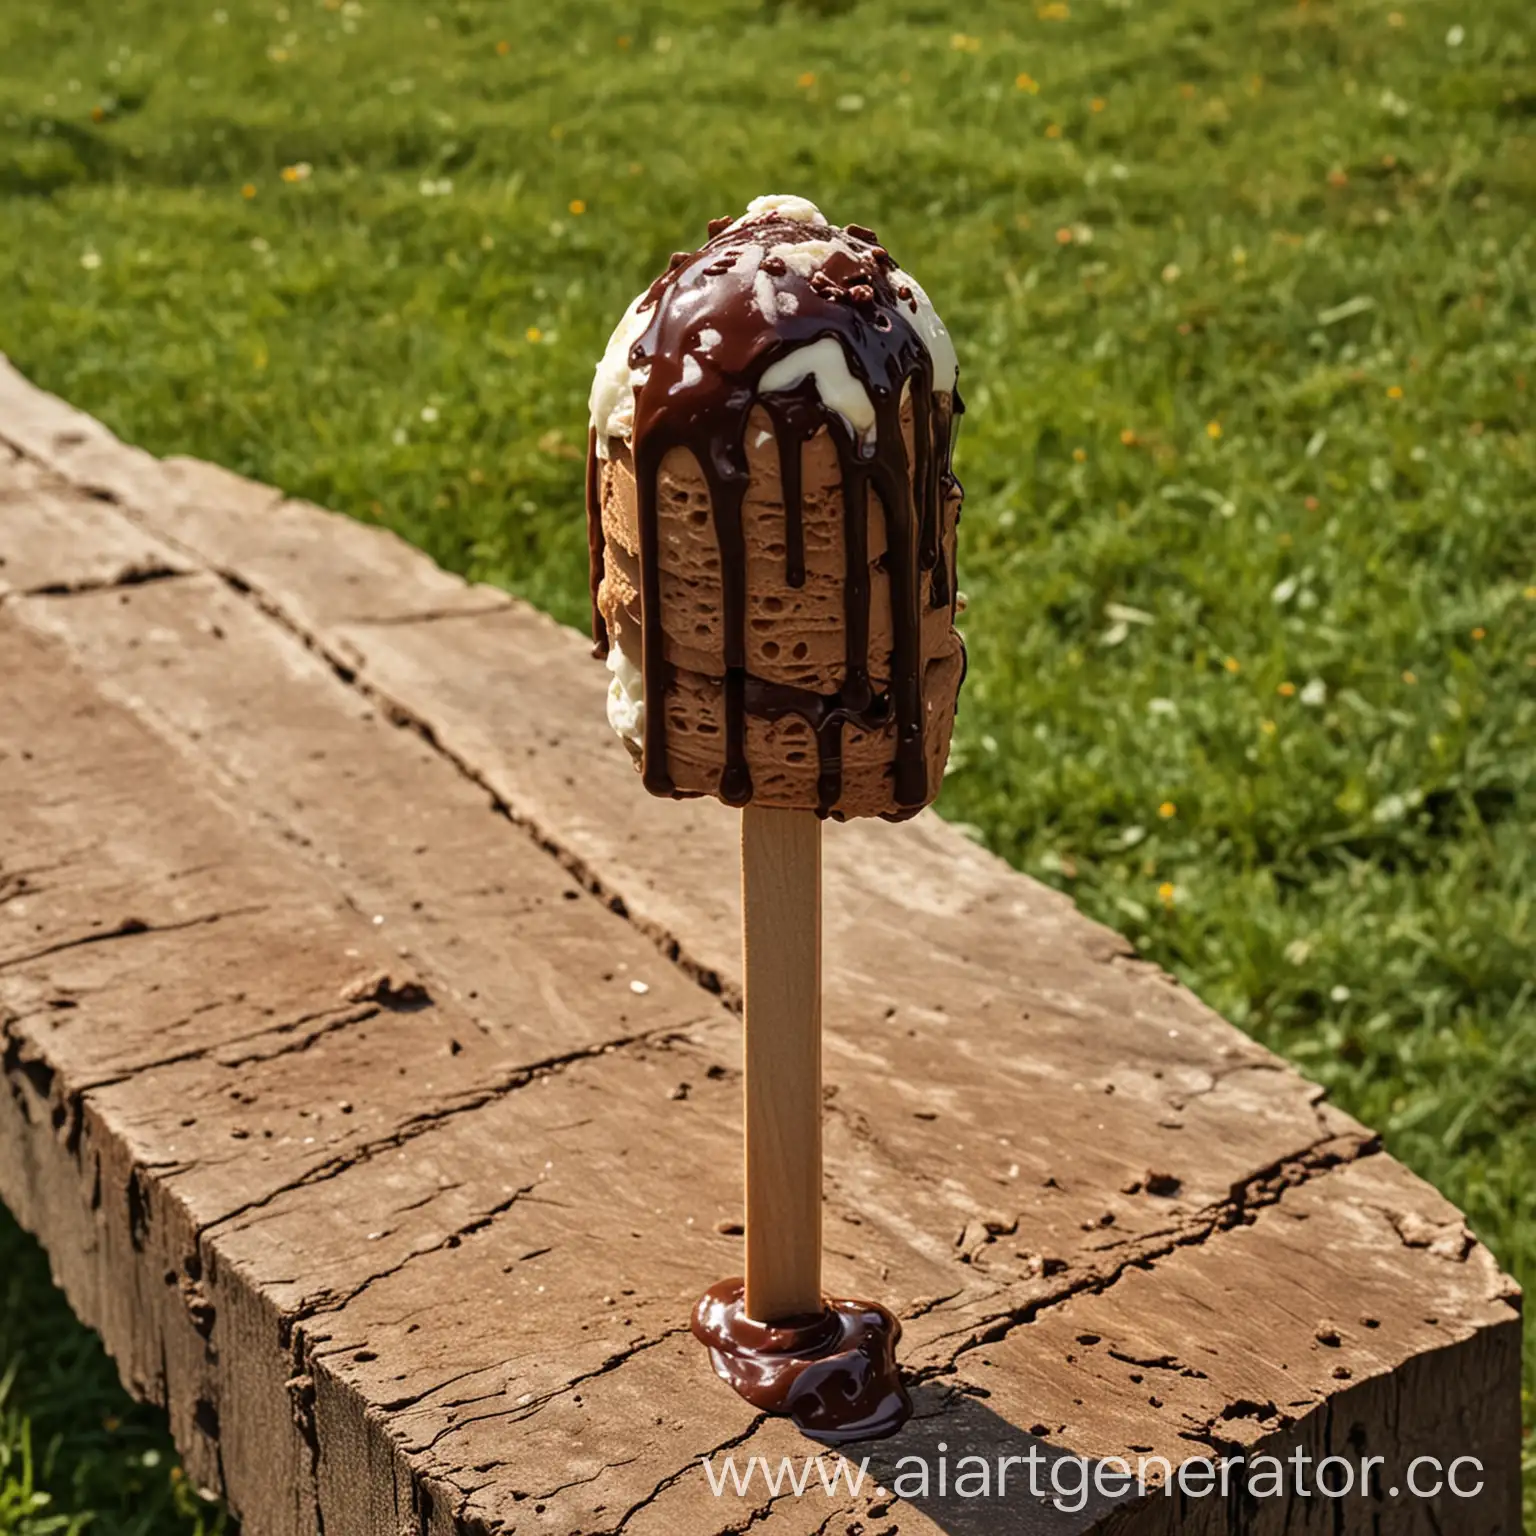 Monumental-Ice-Cream-Bar-on-Wooden-Stick-in-a-Park-Setting